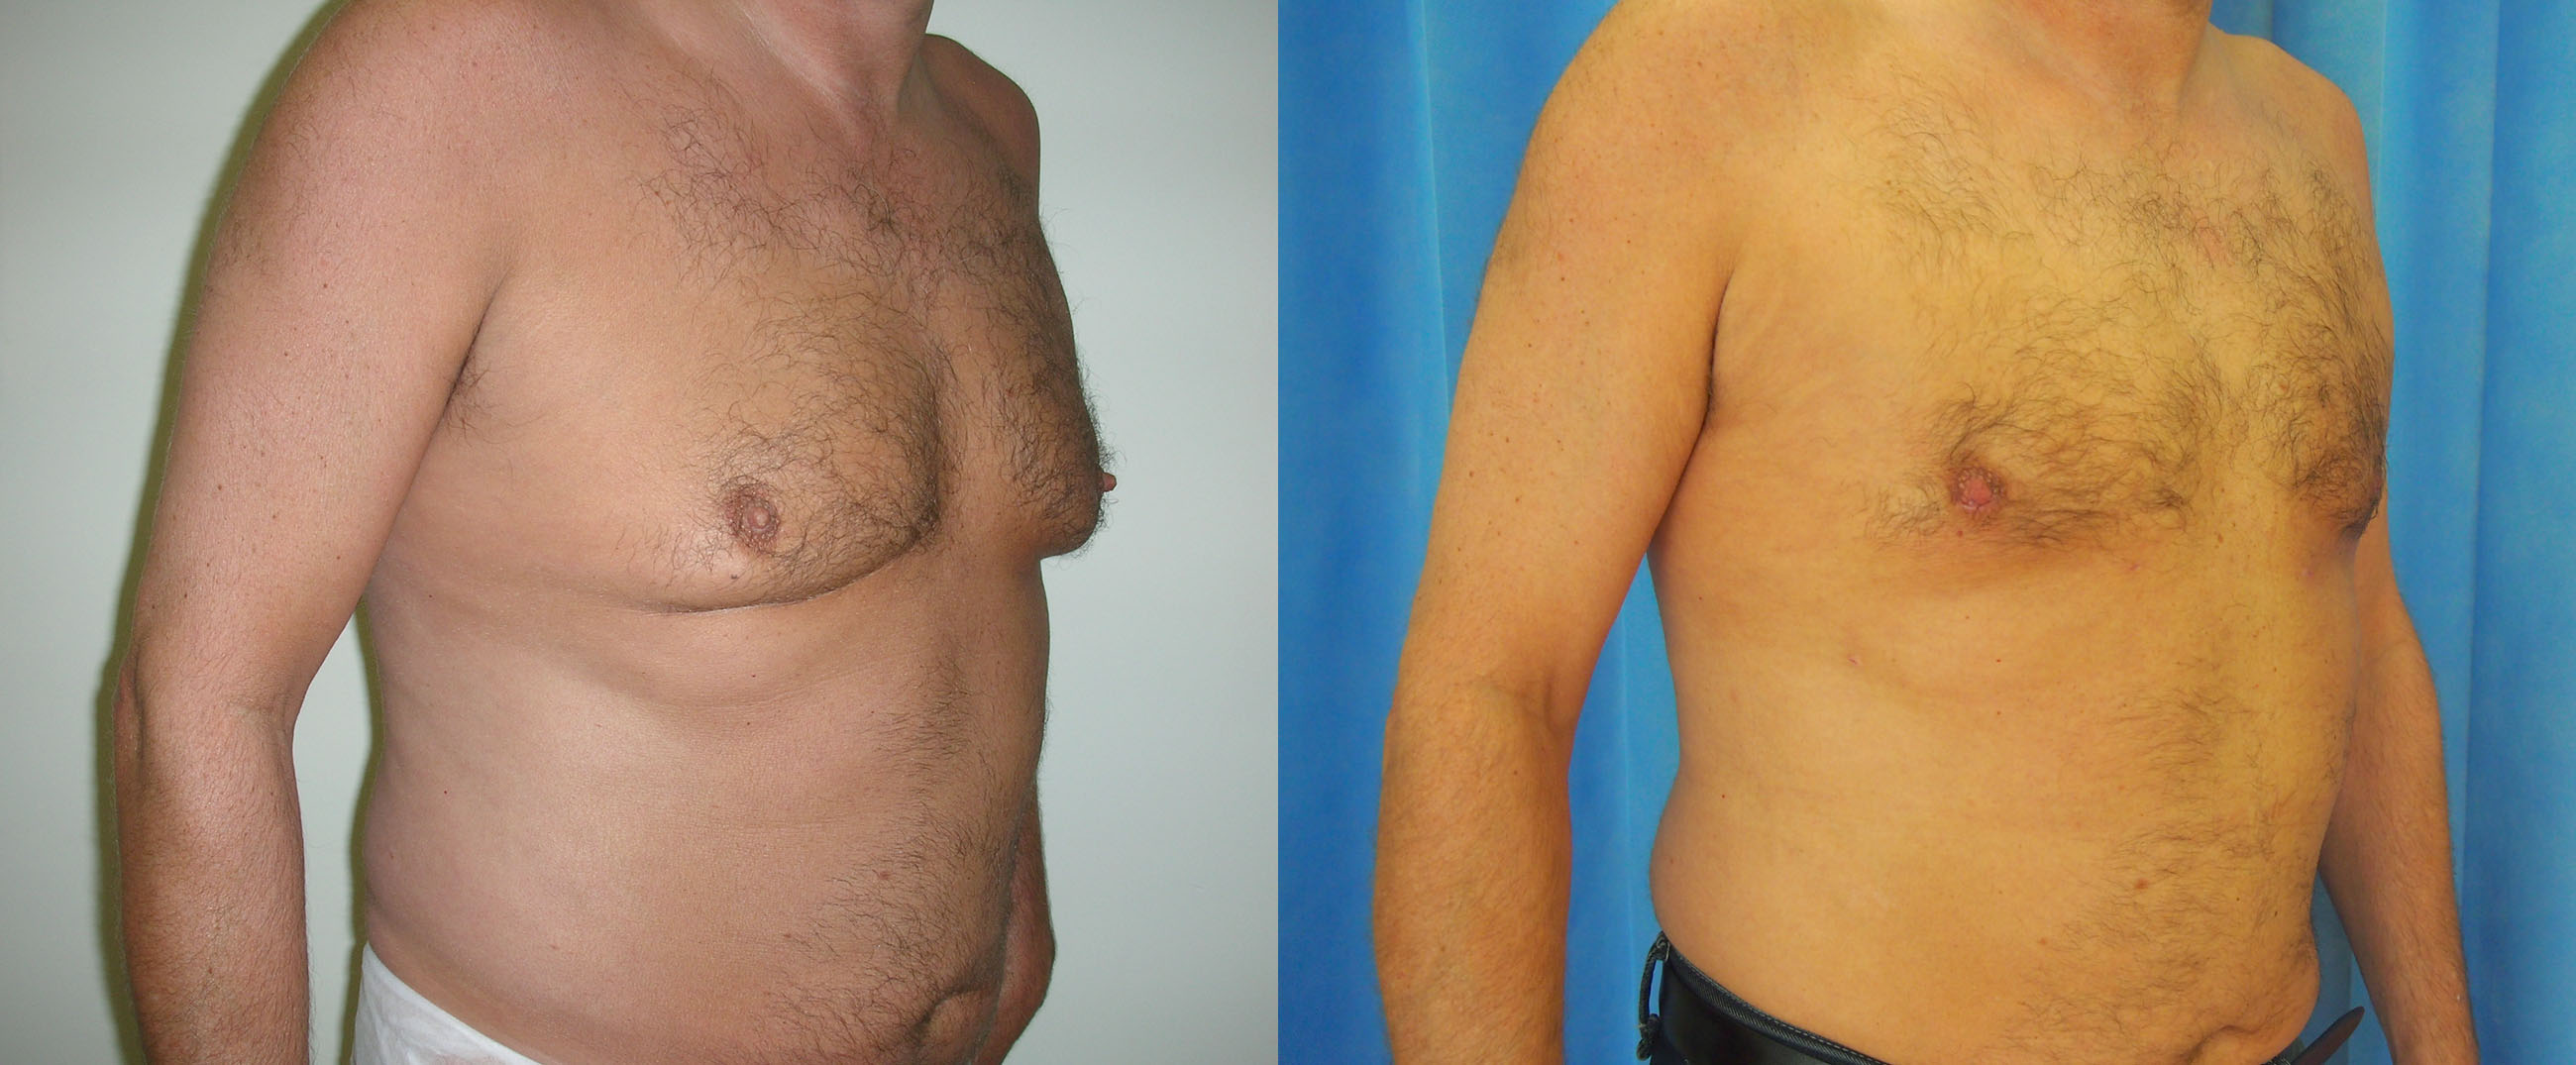 Male chest reduction surgery in London and Manchester